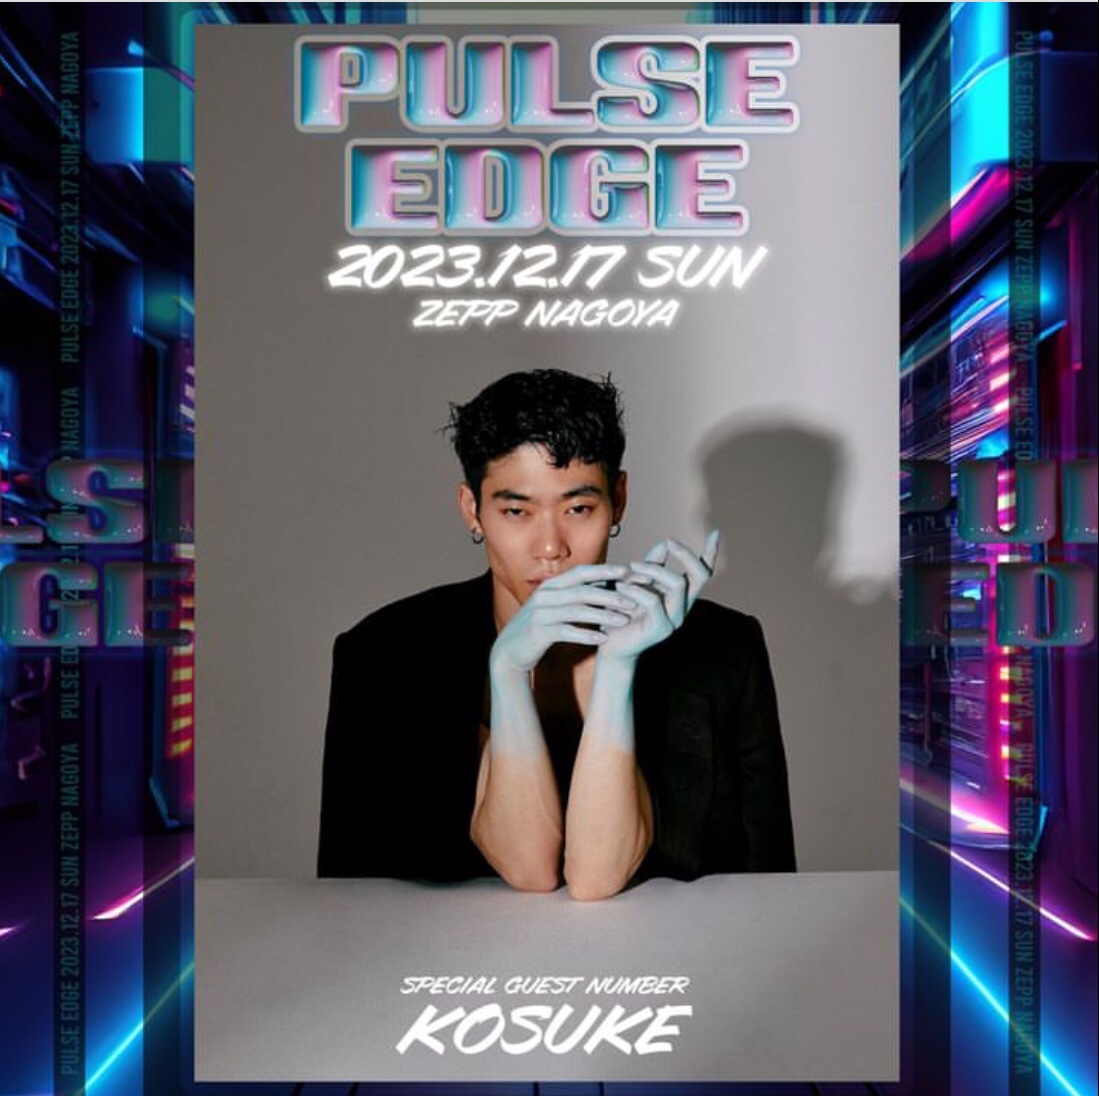 ✅Kosuke Special Guest numberエントリー✅